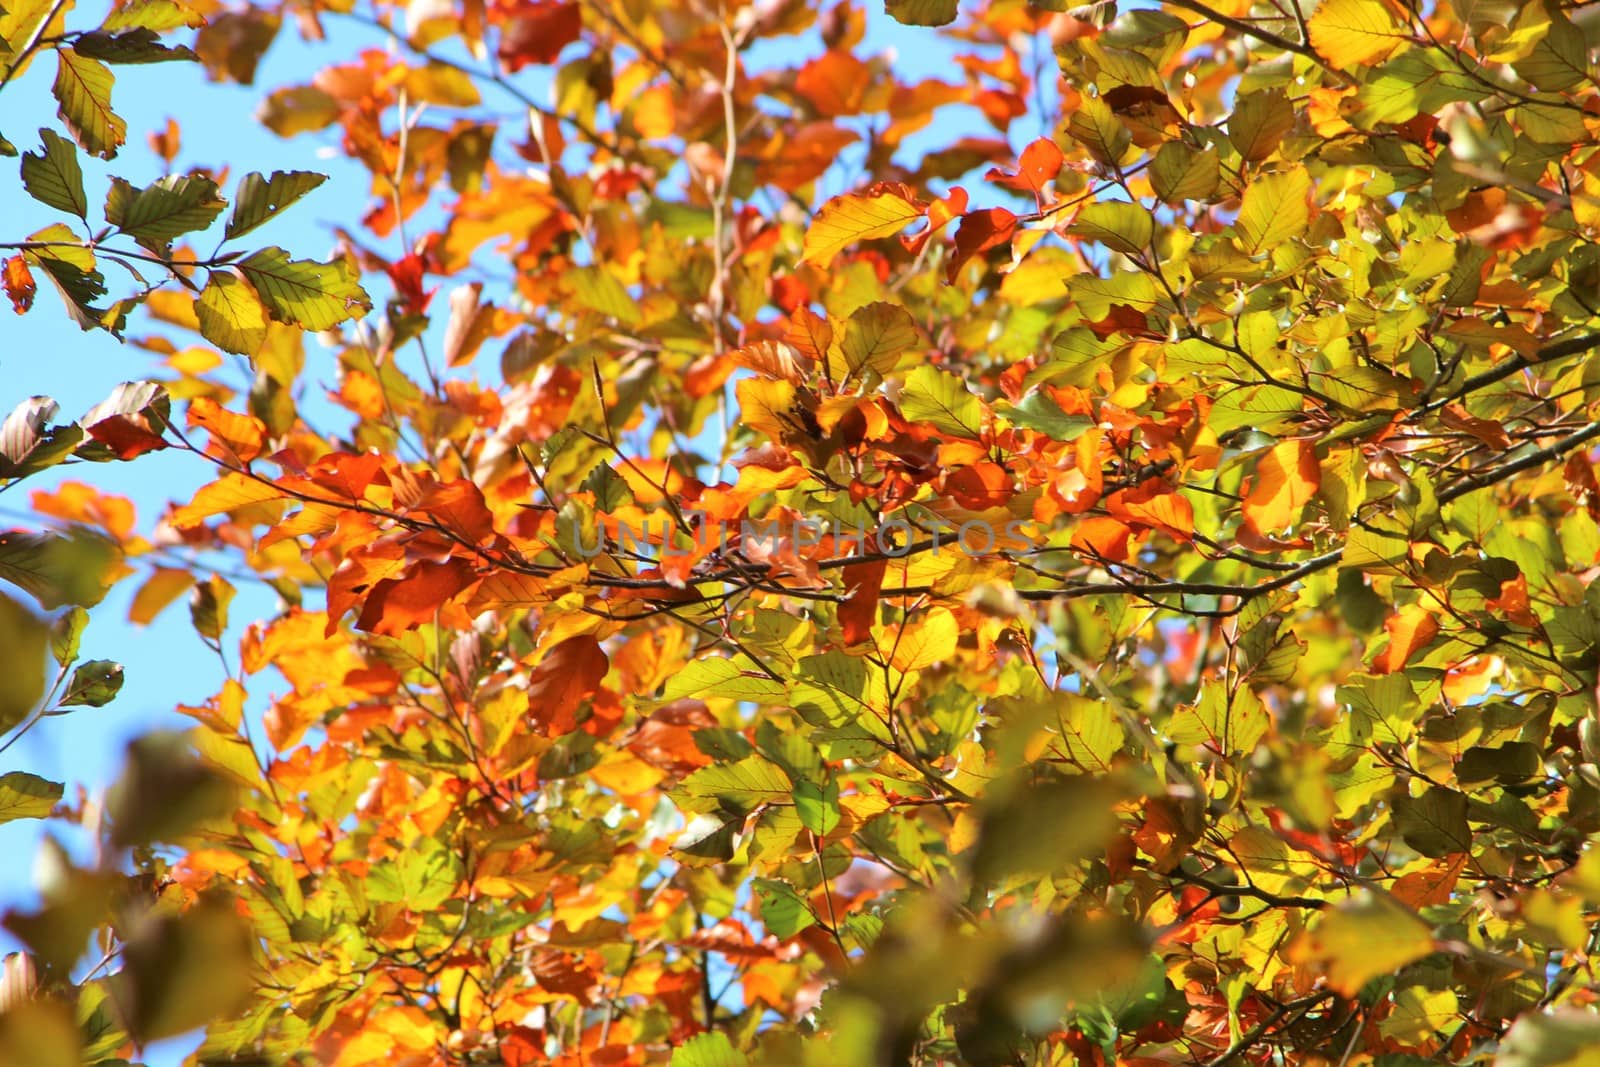 A close-up image of colourful Autumn leaves.